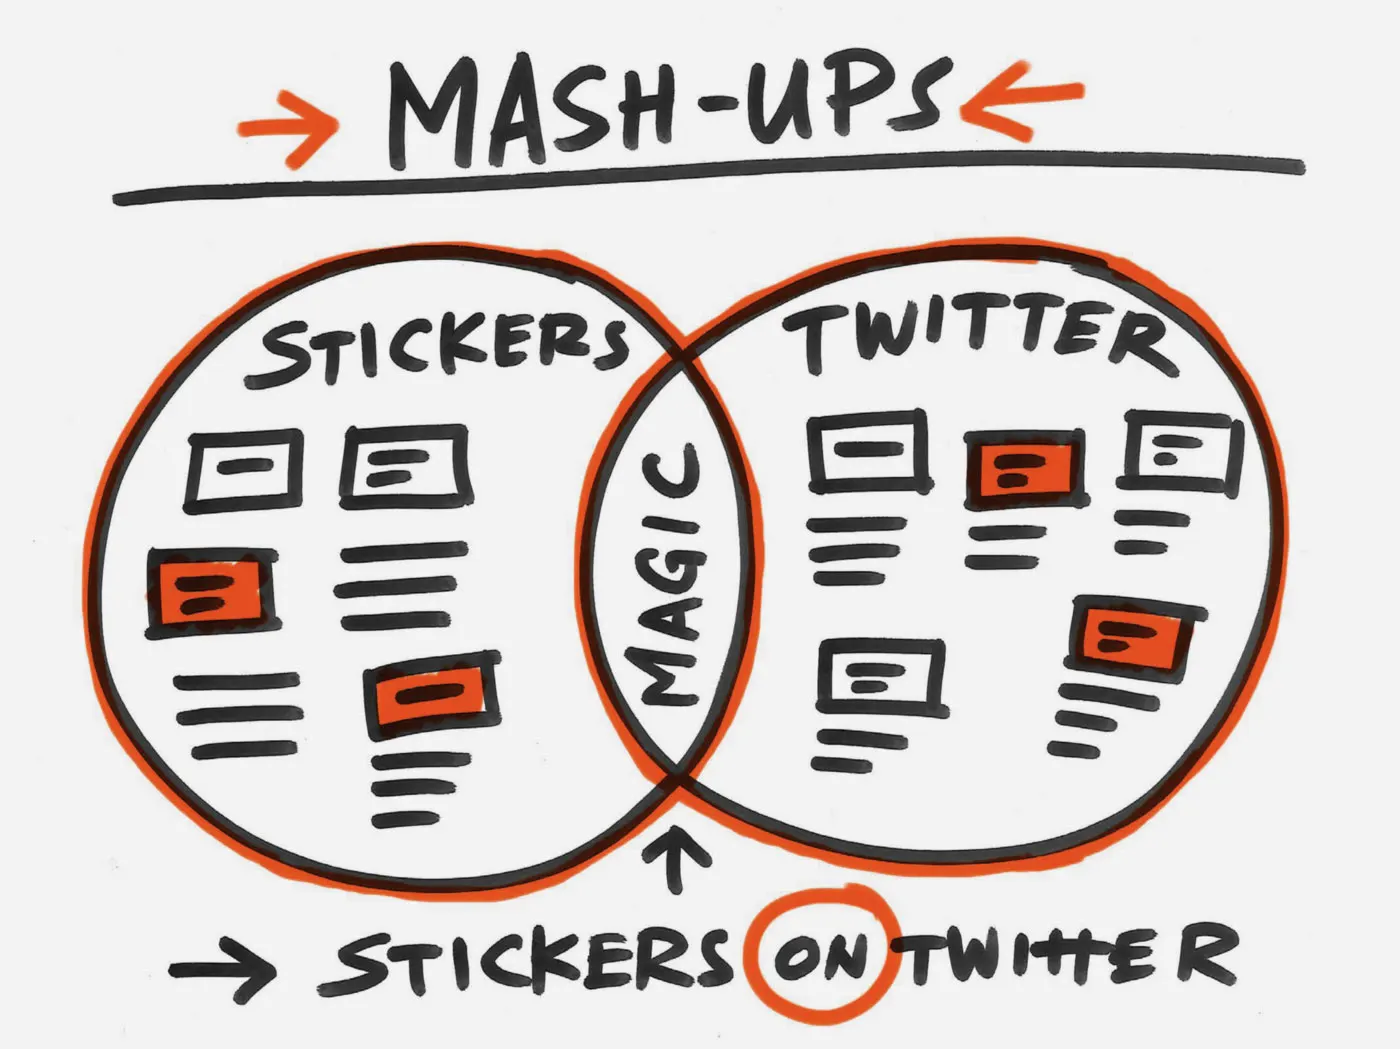 Black marker sketch with the heading "Mash-ups" and a Venn diagram with Stickers in one circle, Twitter in another, and Magic: Stickers on Twitter where they intersect.